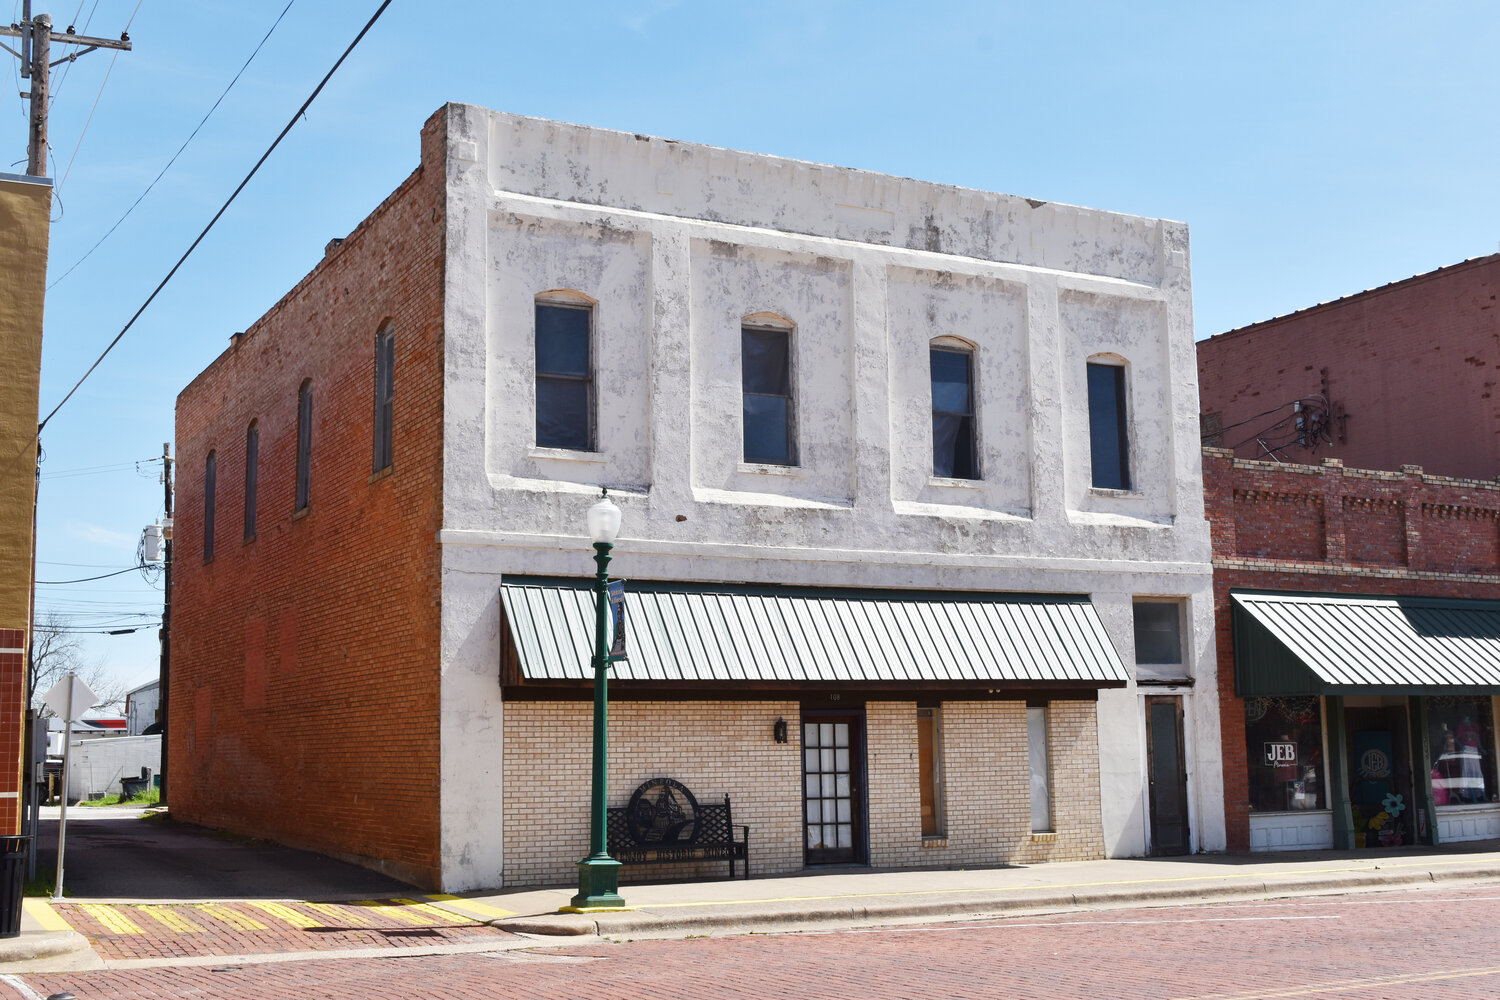 Exterior renovation plans have been approved for 108. N. Johnson St. in Mineola.